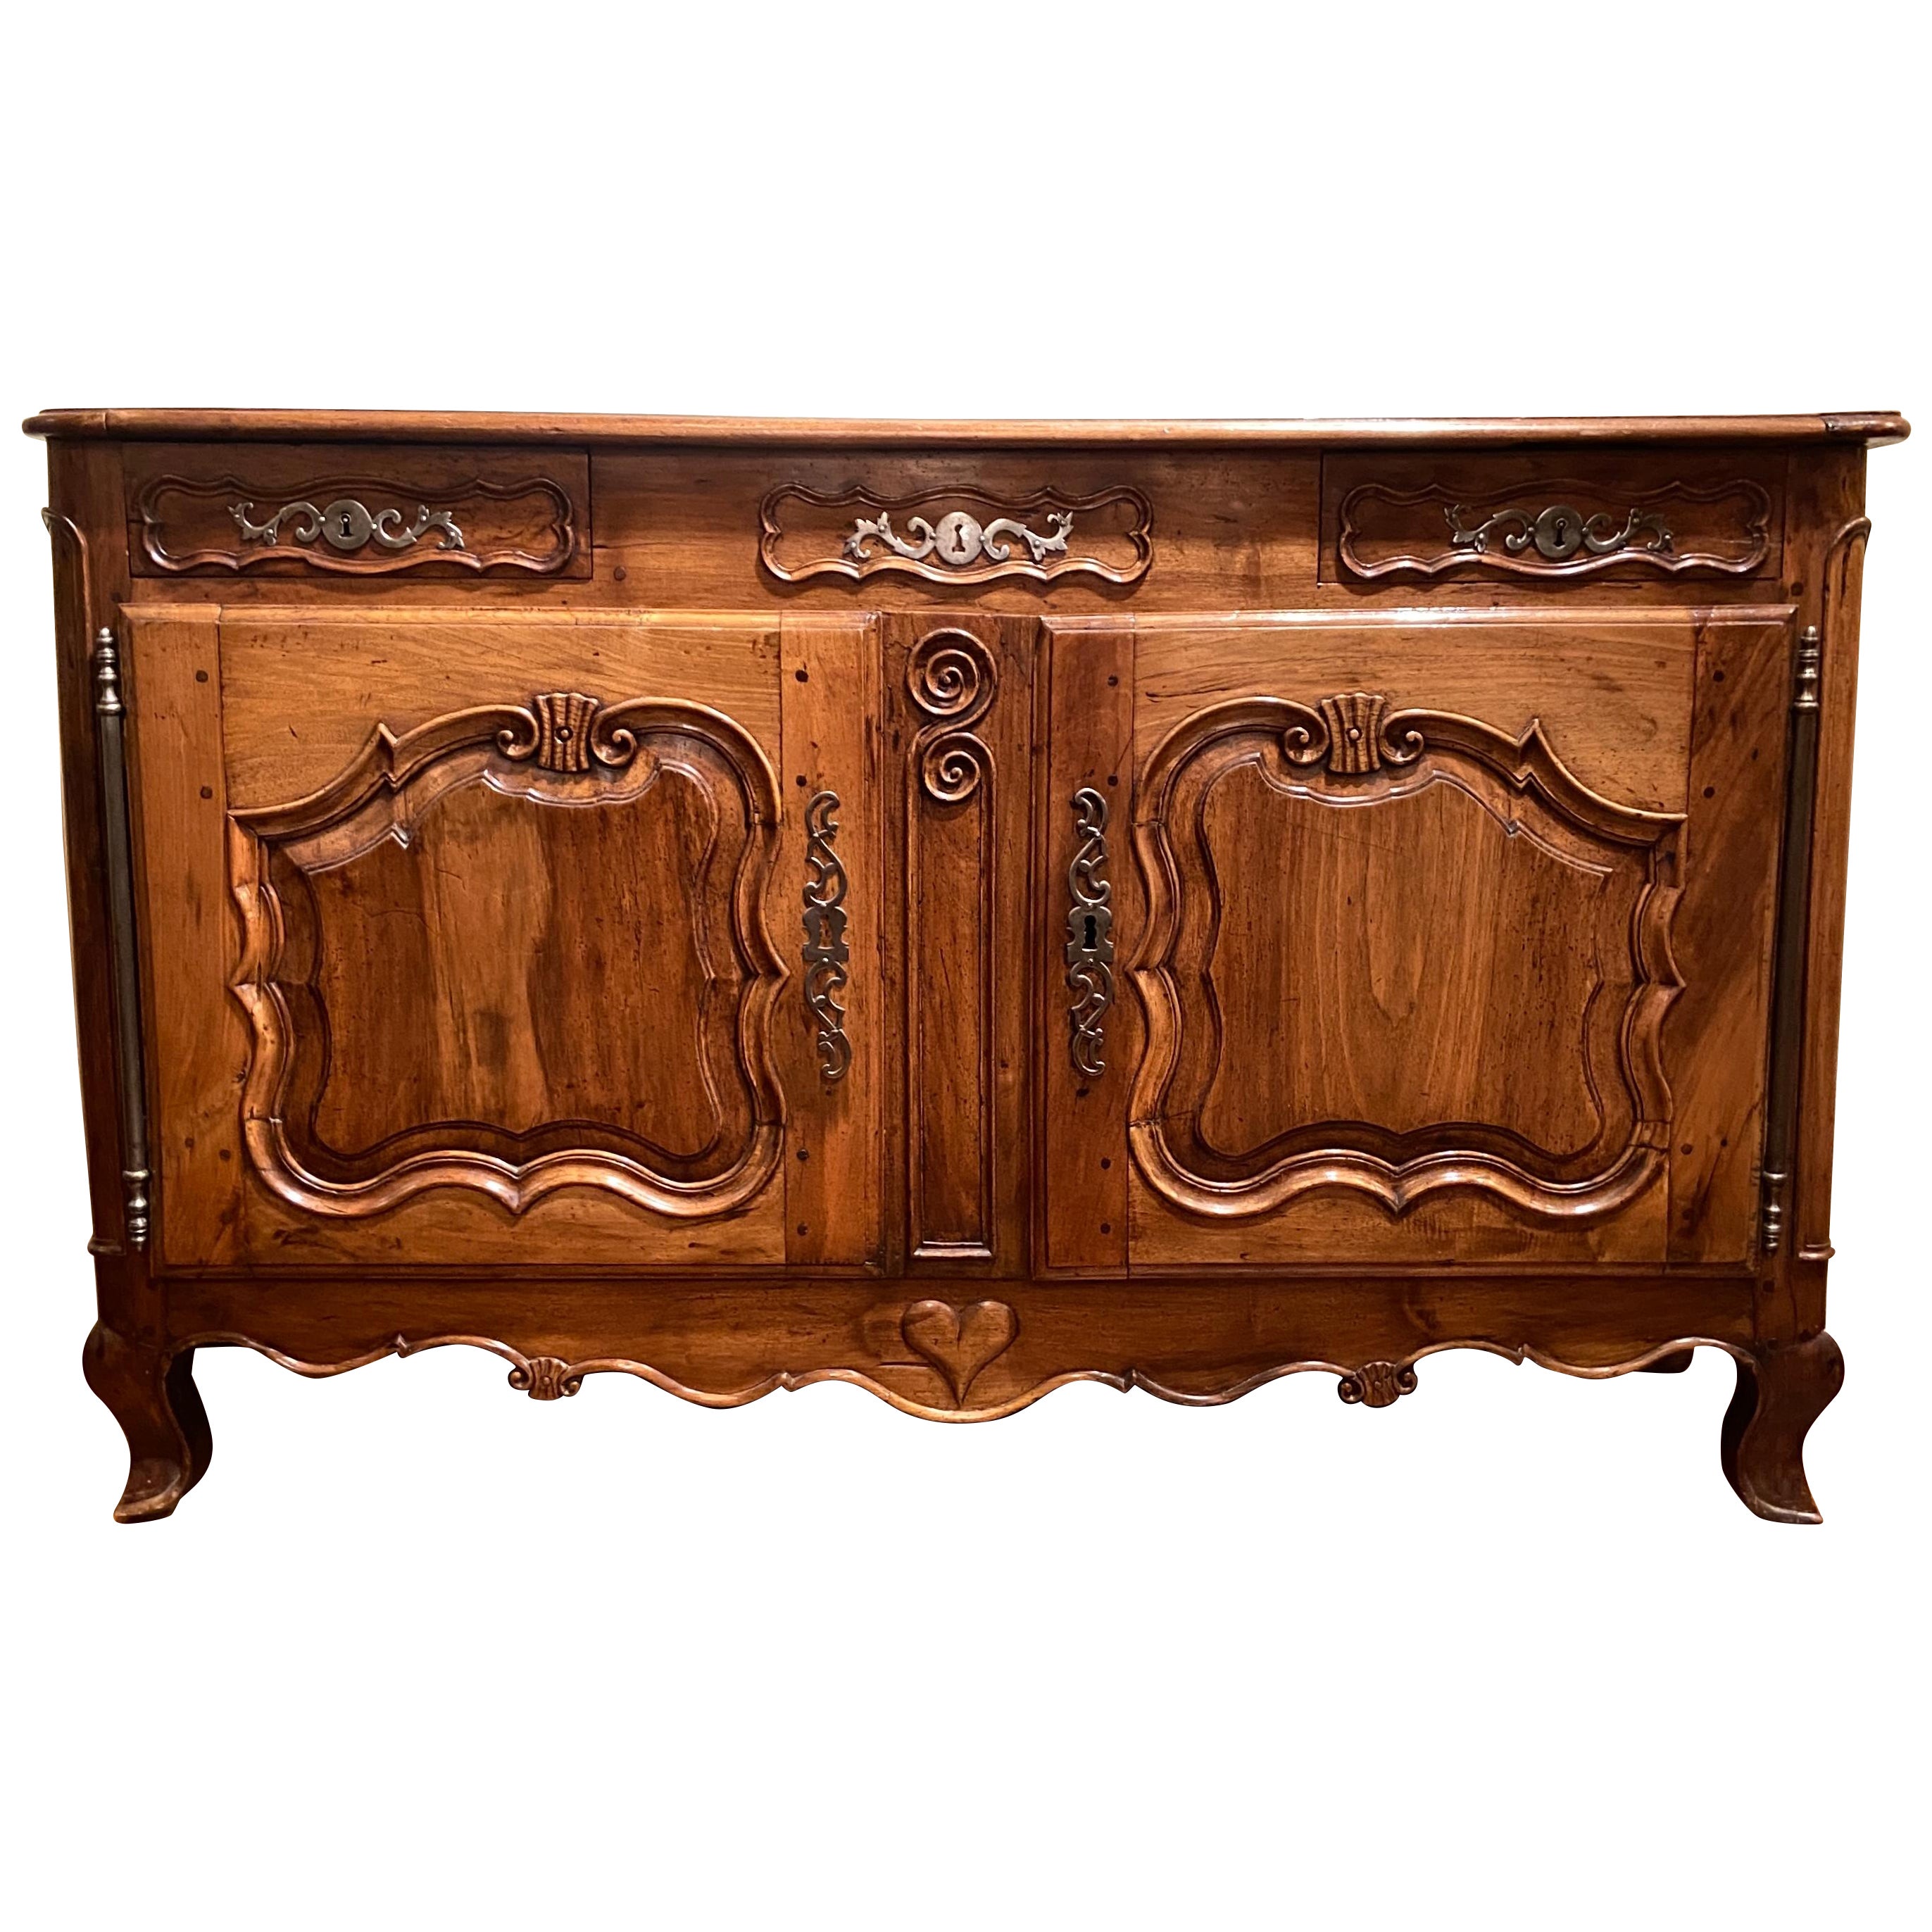 Antique 19th Century French Country Walnut Buffet, Circa 1840